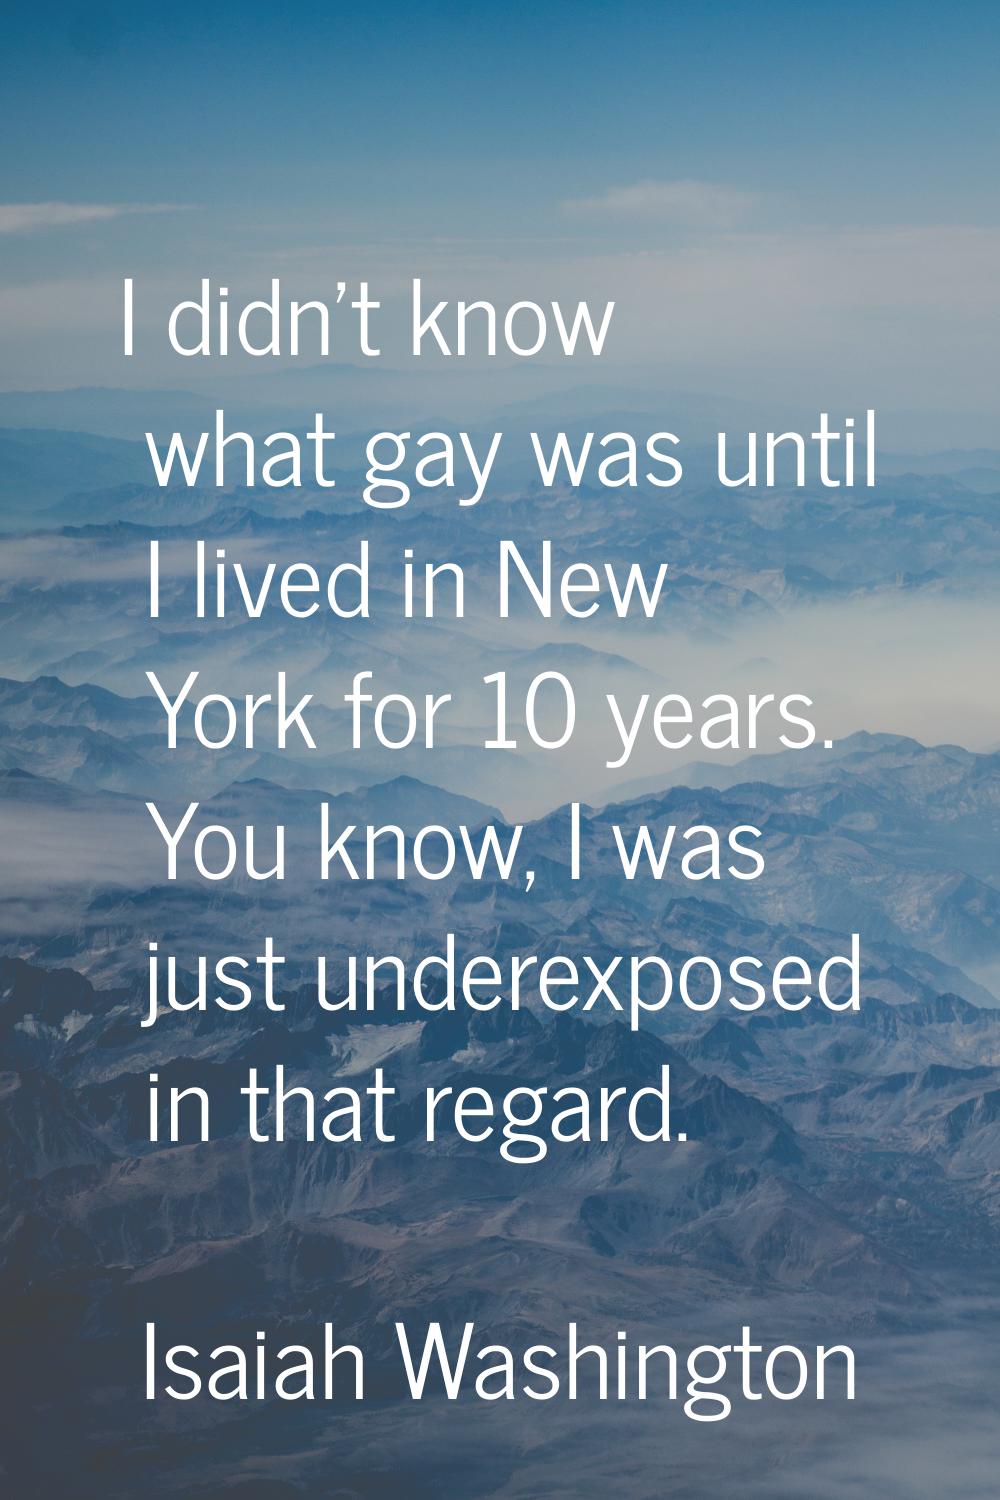 I didn't know what gay was until I lived in New York for 10 years. You know, I was just underexpose